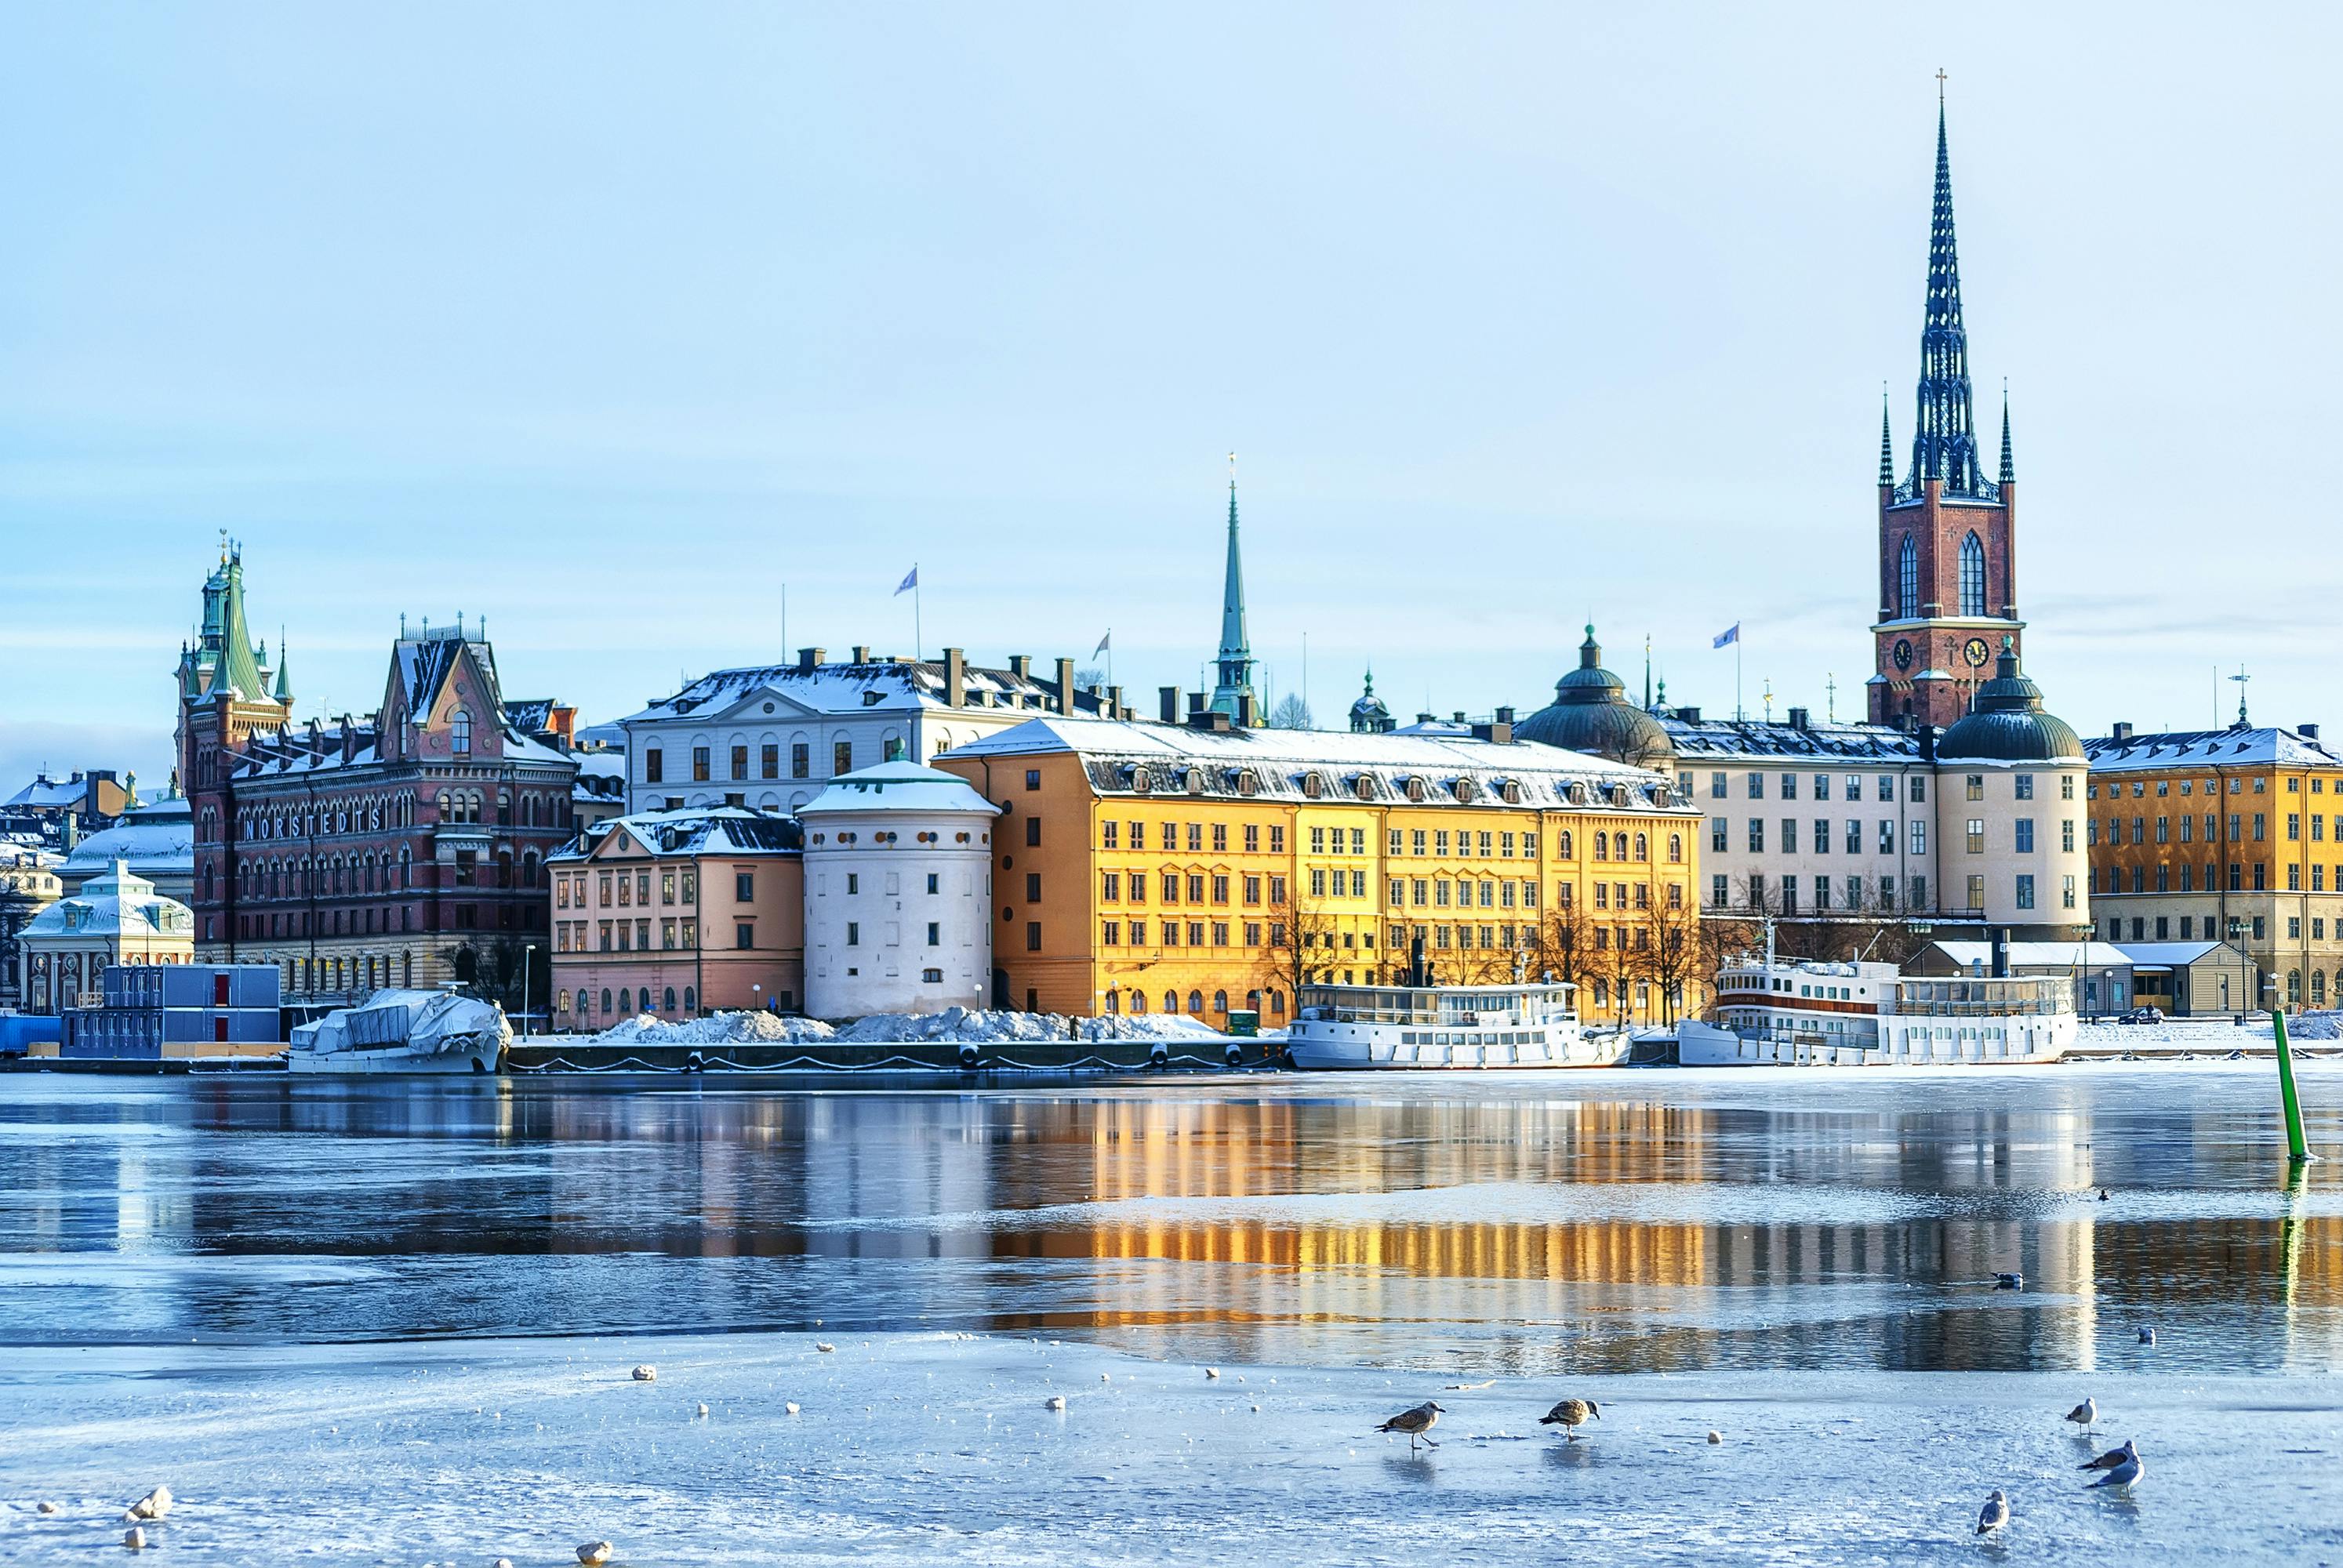 Stockholm winter city kayak tour historic canals and waterways